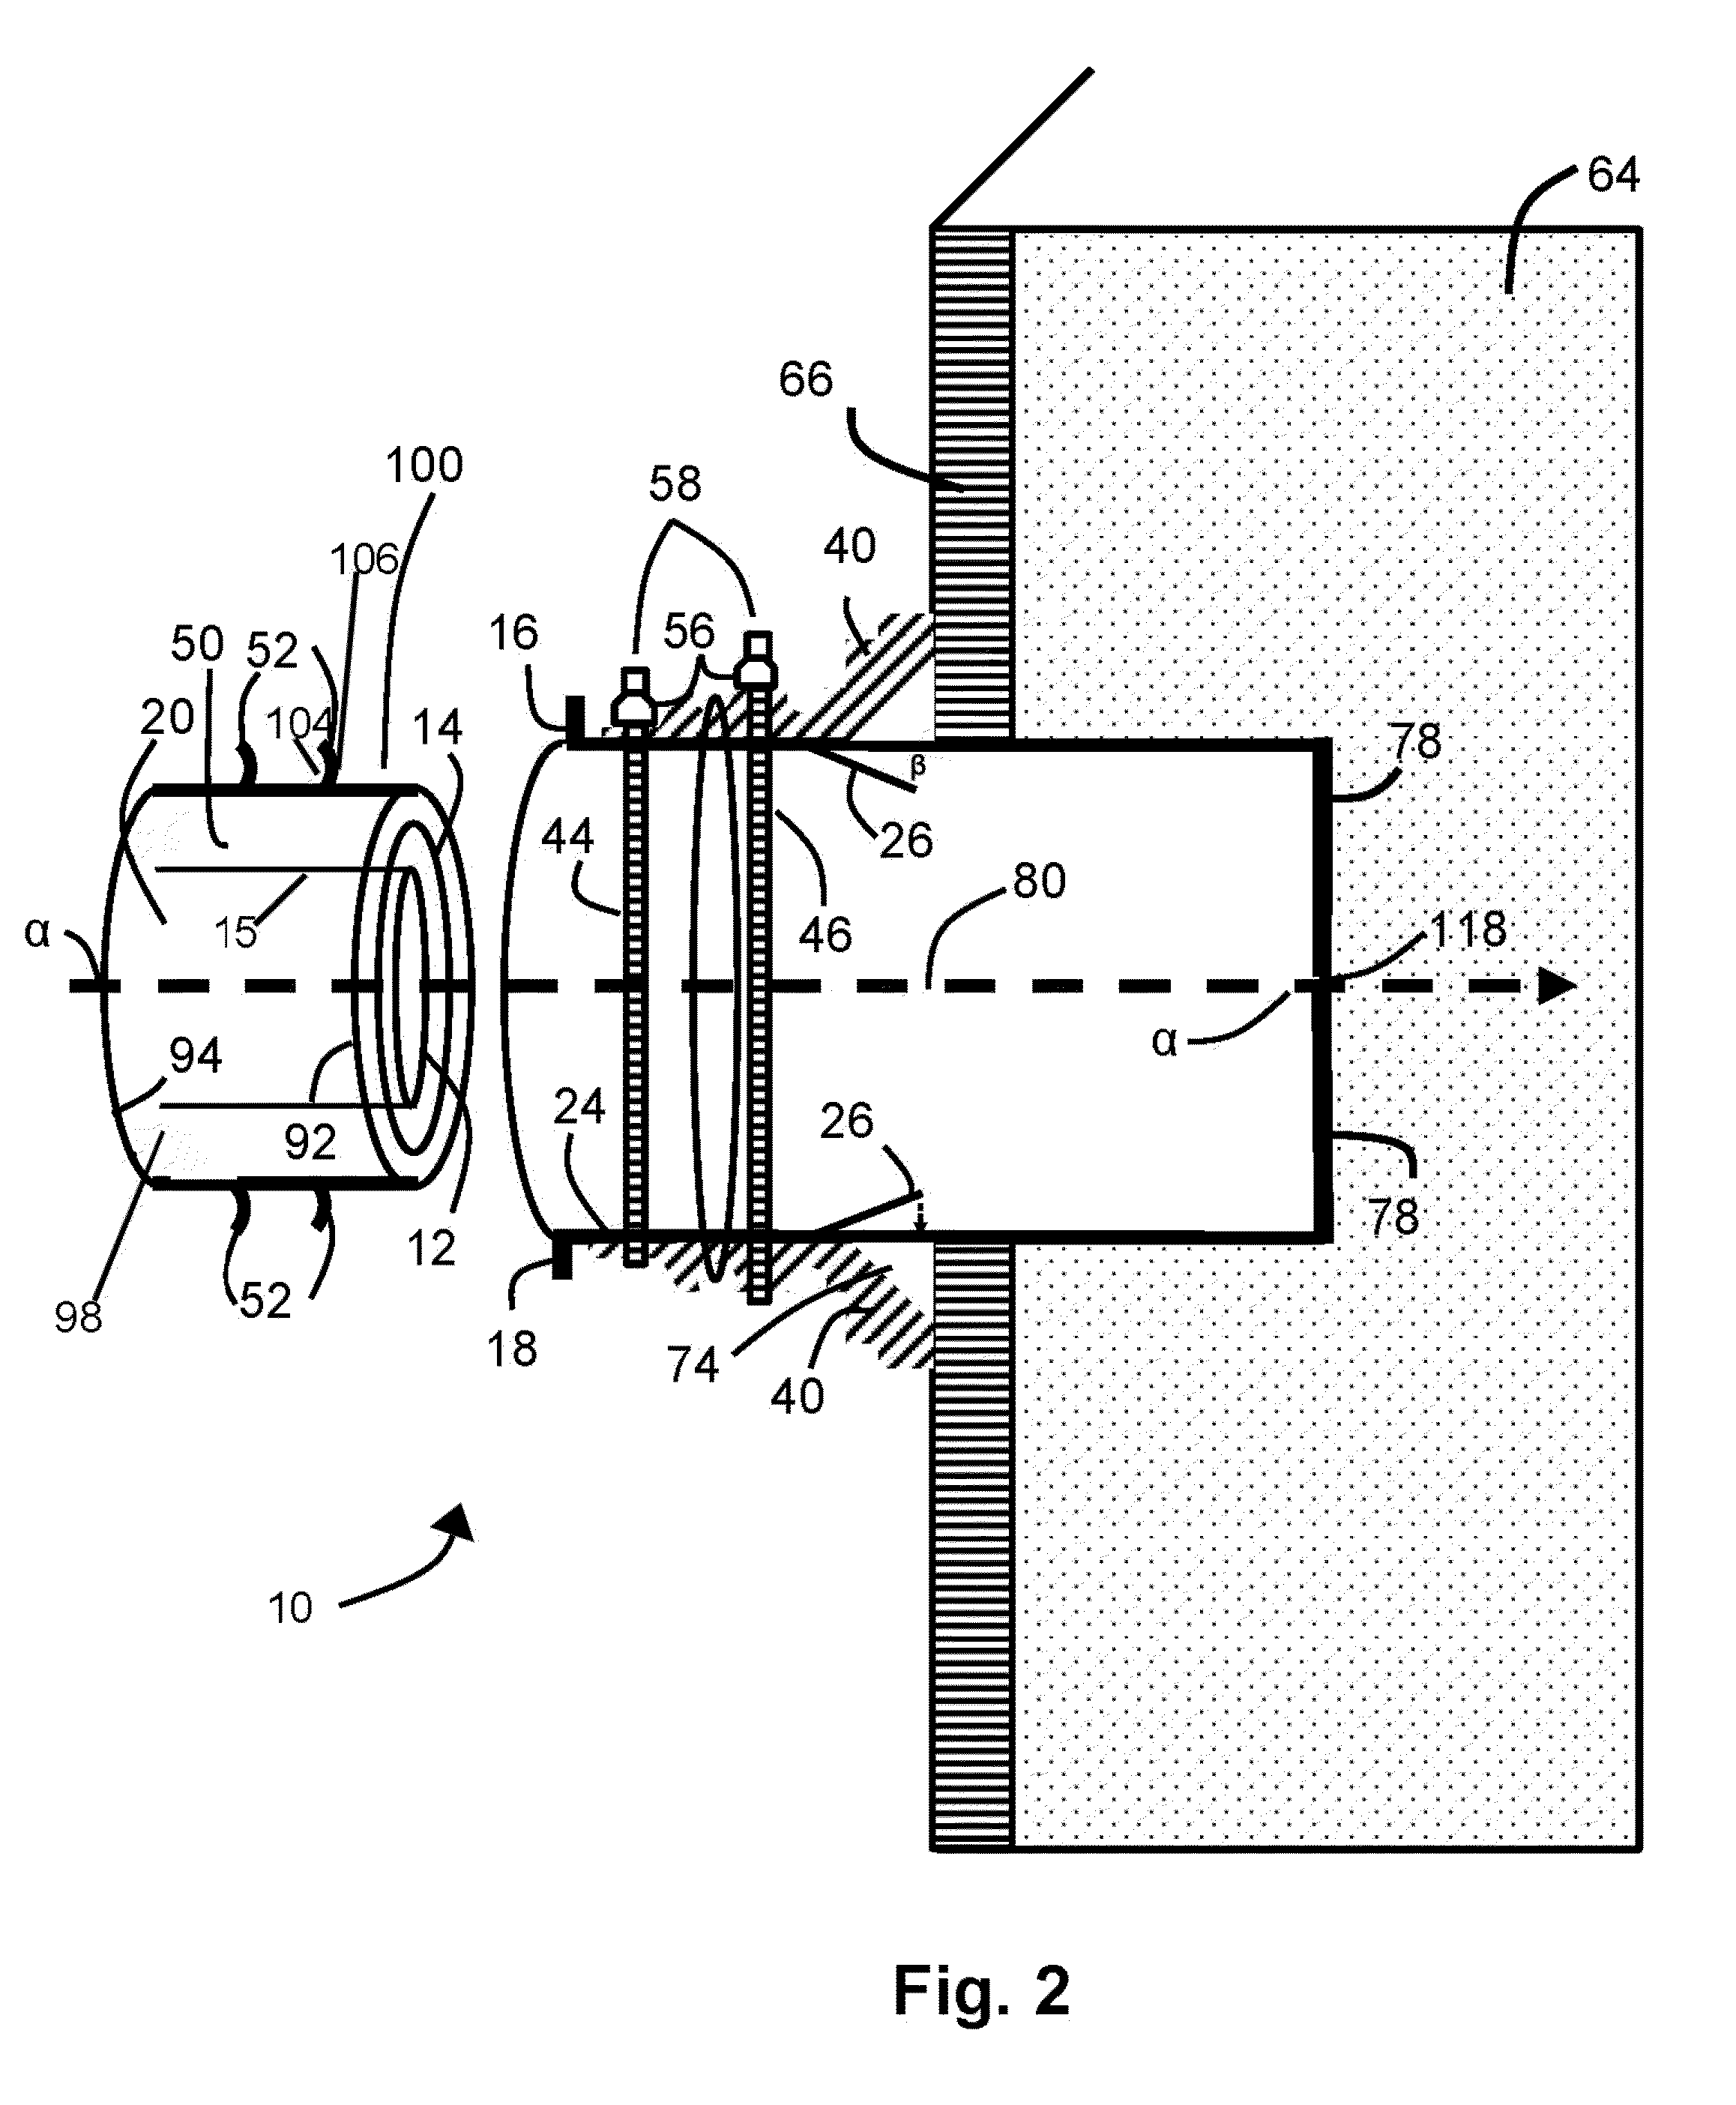 Resource loading system and method for use in atmosphere-containment scenarios